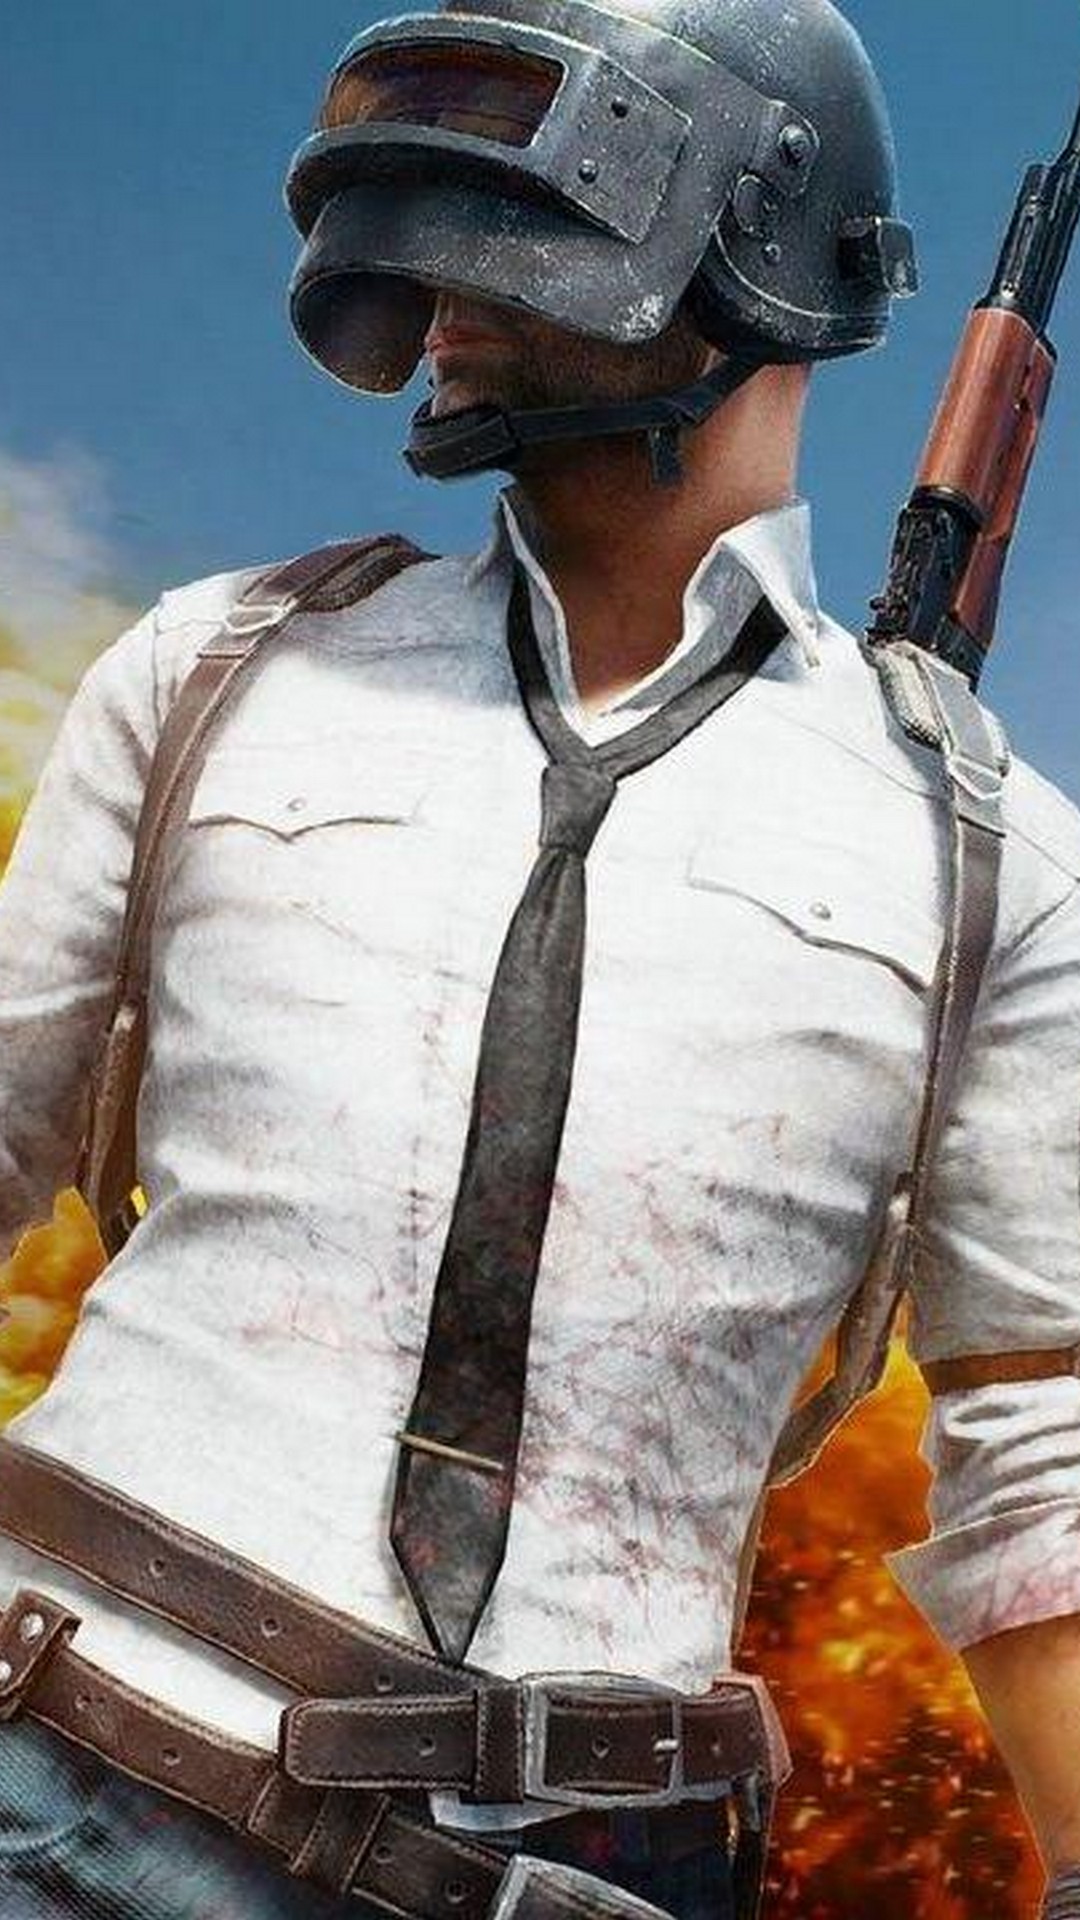 Pubg Ps4 Wallpaper Iphone With Image Resolution Pixel - Pubg Wallpaper Hd  Download - 1080x1920 Wallpaper 